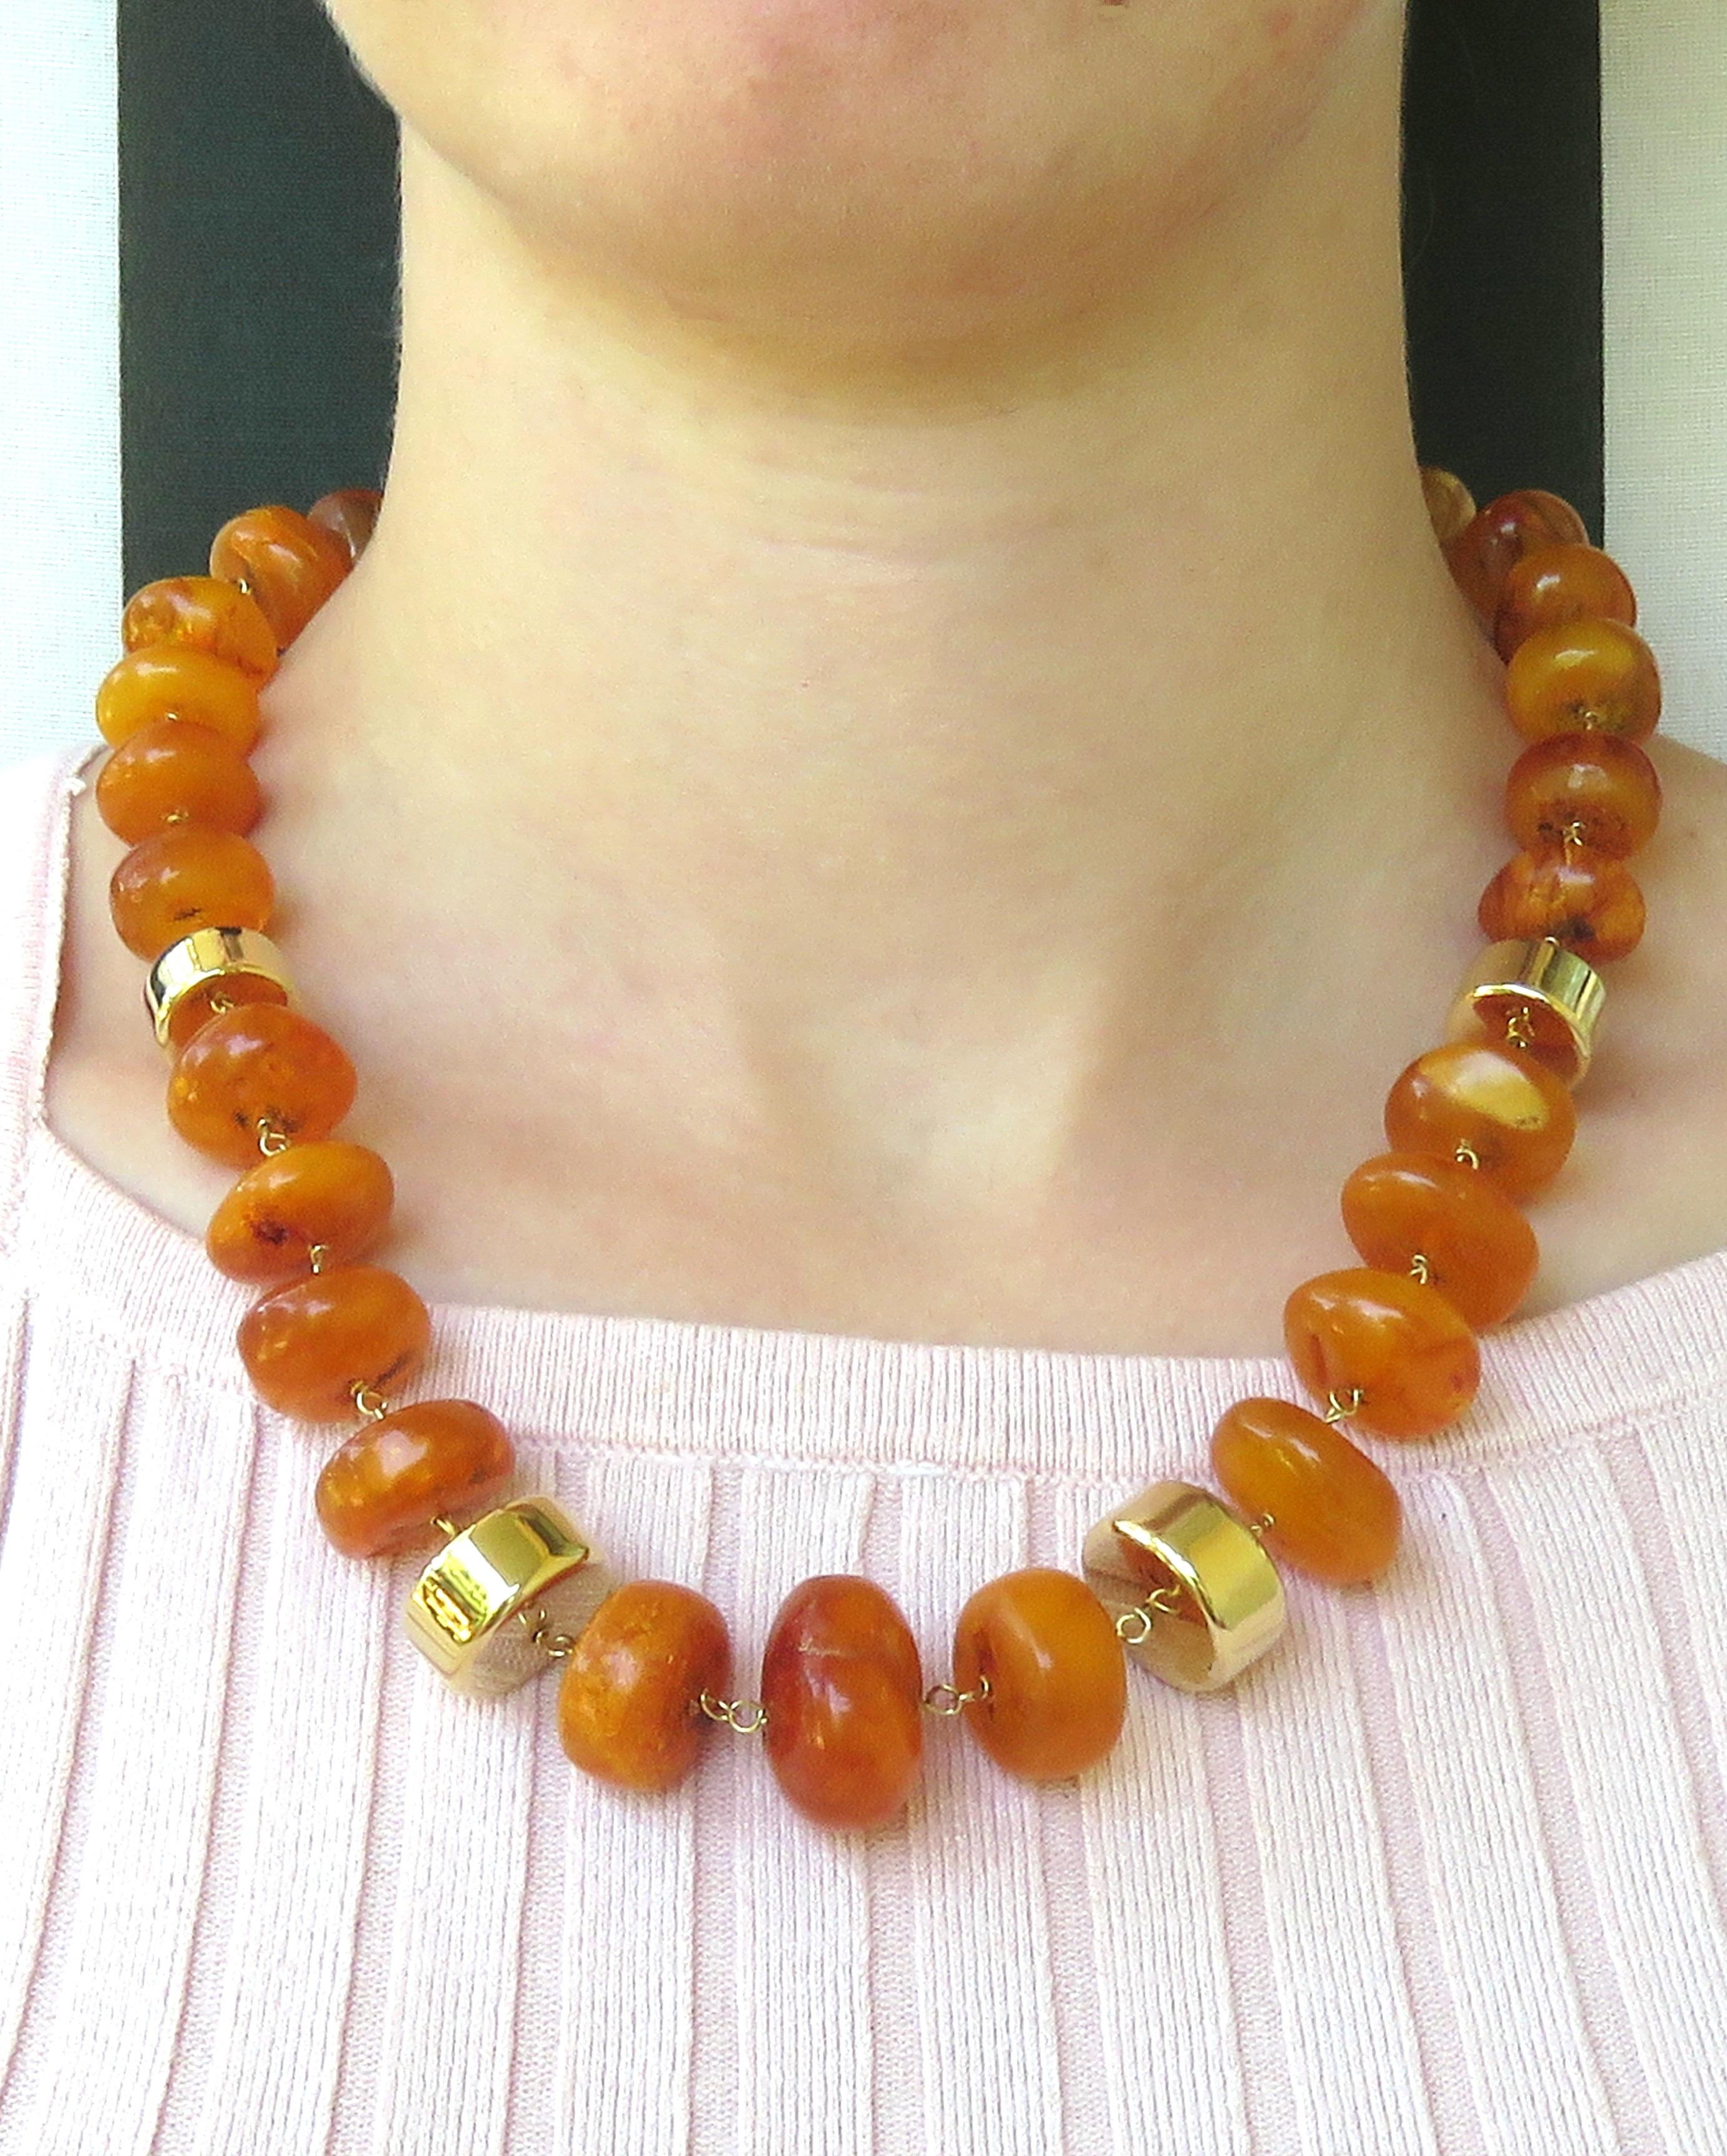 This attractive necklace of graduated Baltic honey amber beads is chained in 18 karat yellow gold with four decorative cylindrical gold beads with spring ring clasp. The total length of this princess necklace is 500 millimeters / 19.685 inches. The